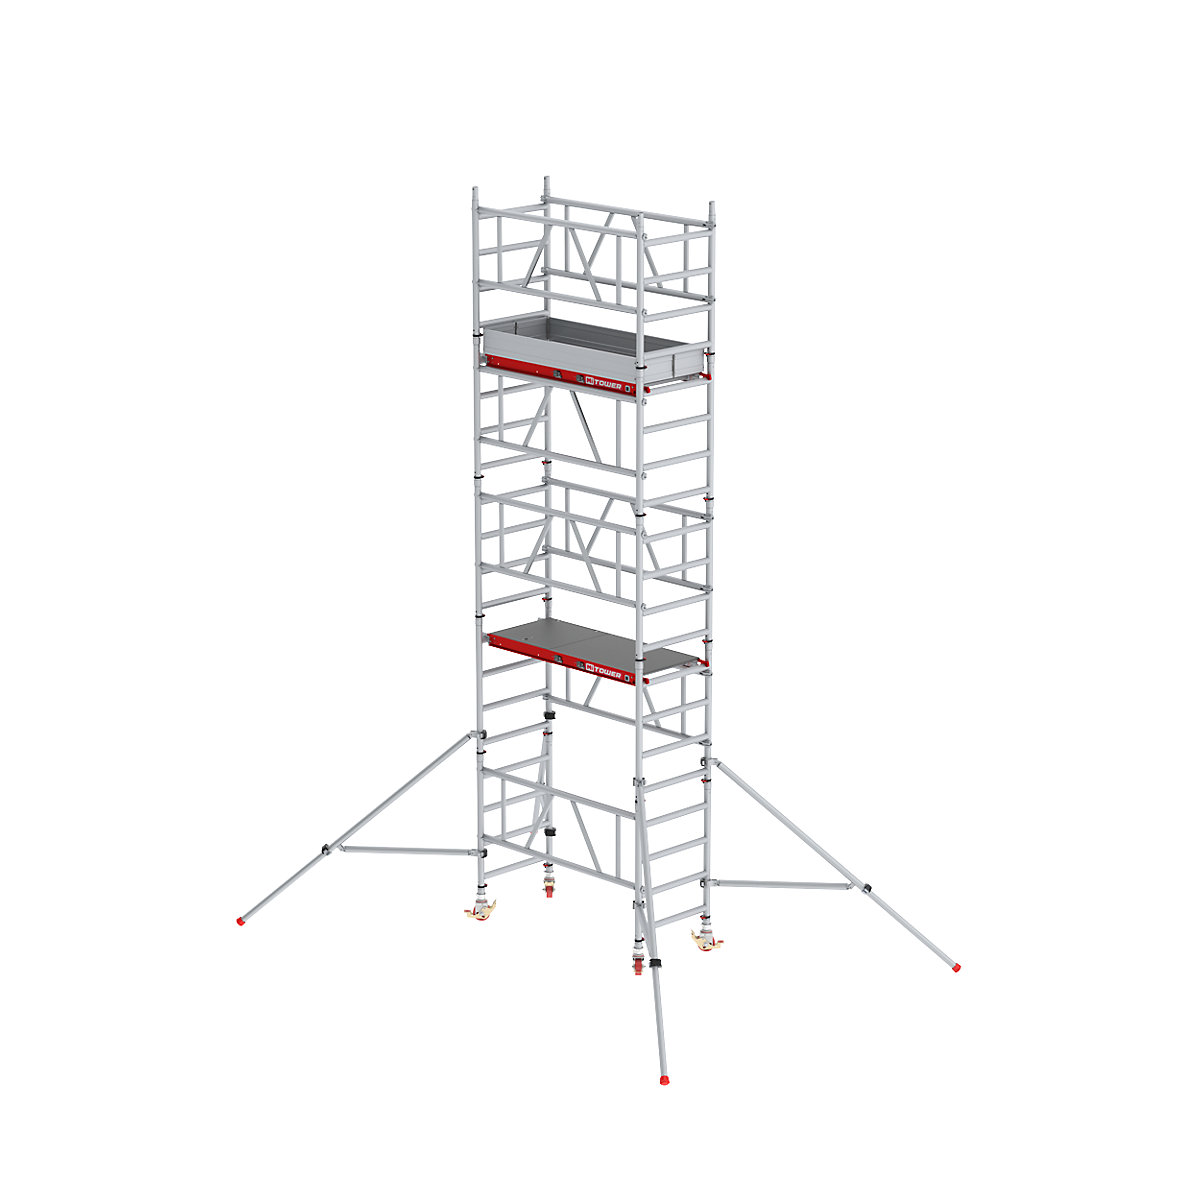 MiTOWER Plus quick assembly mobile access tower – Altrex, Fiber-Deck® platform, working height 6 m-1